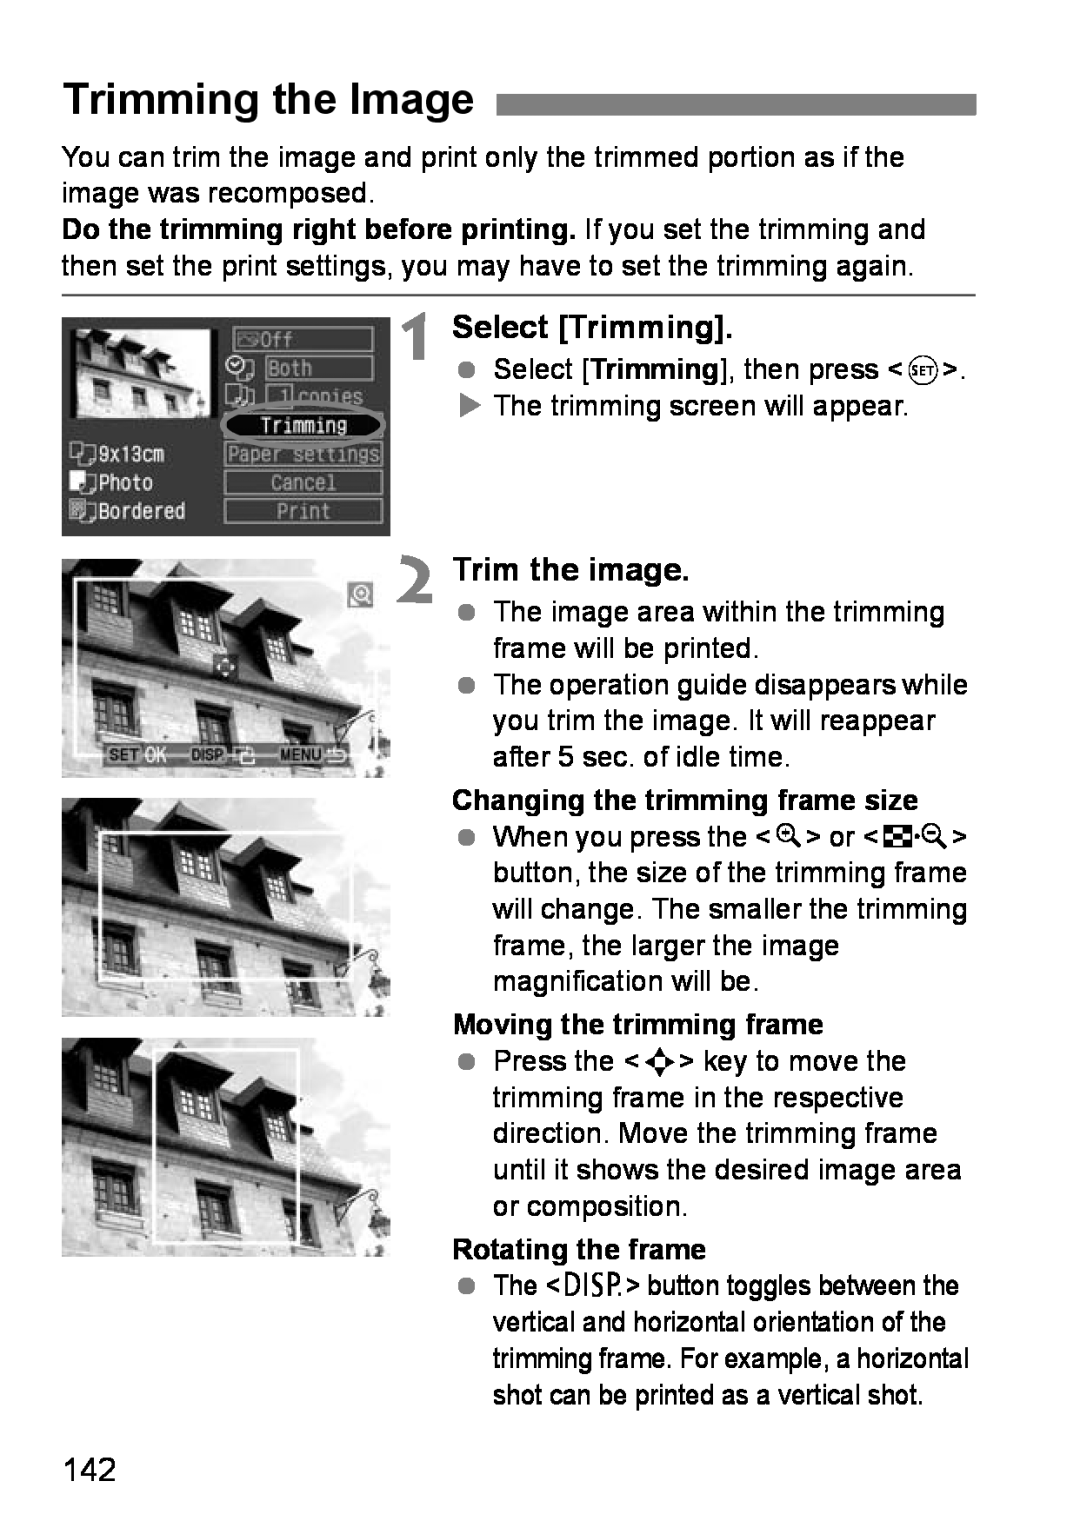 Canon EOS DIGITAL REBEL XTI instruction manual Trimming the Image, Select Trimming, Trim the image, Rotating the frame 